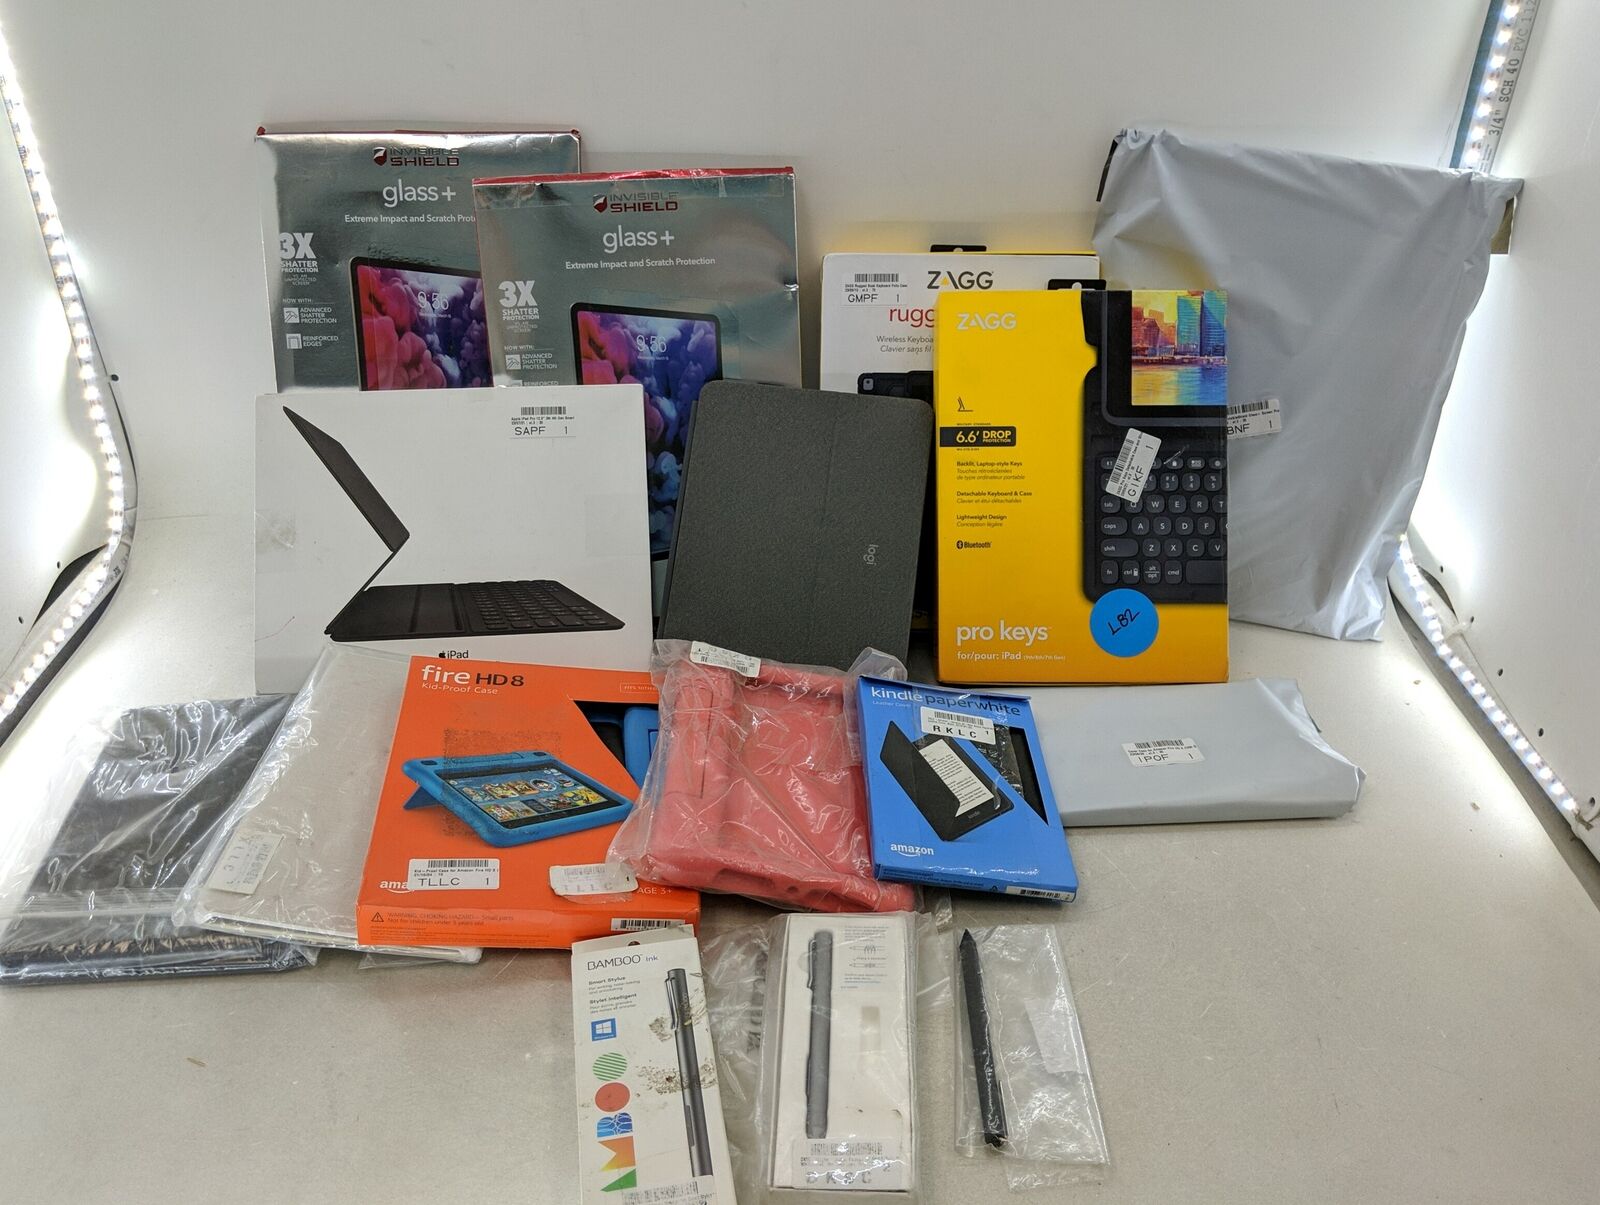 Revised Assorted Tablet Accessories - Apple, Logitech, ZAGG & More